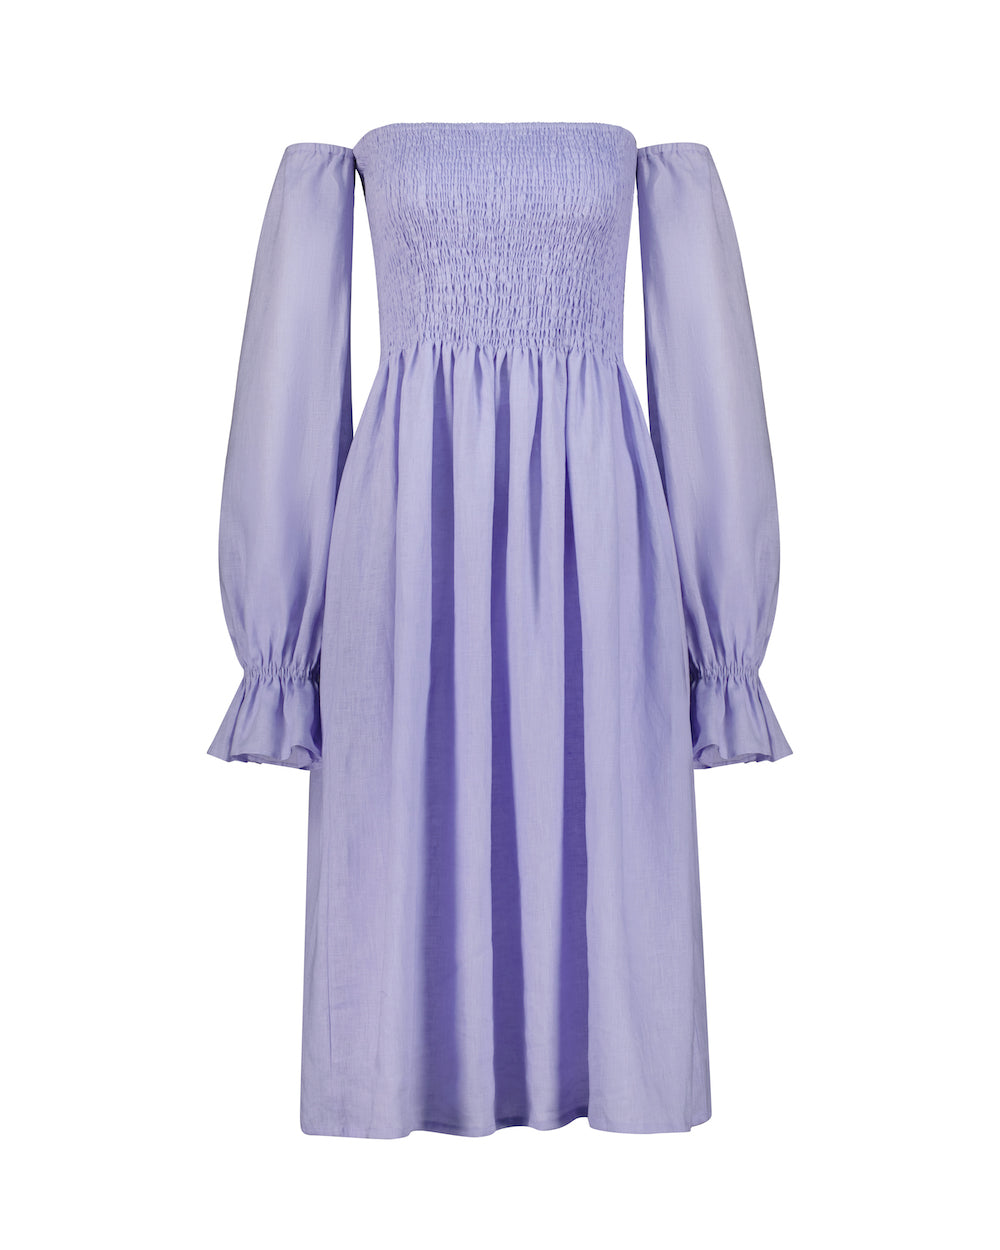 Limited Edition Mimosa Dress in Lilac/Custom